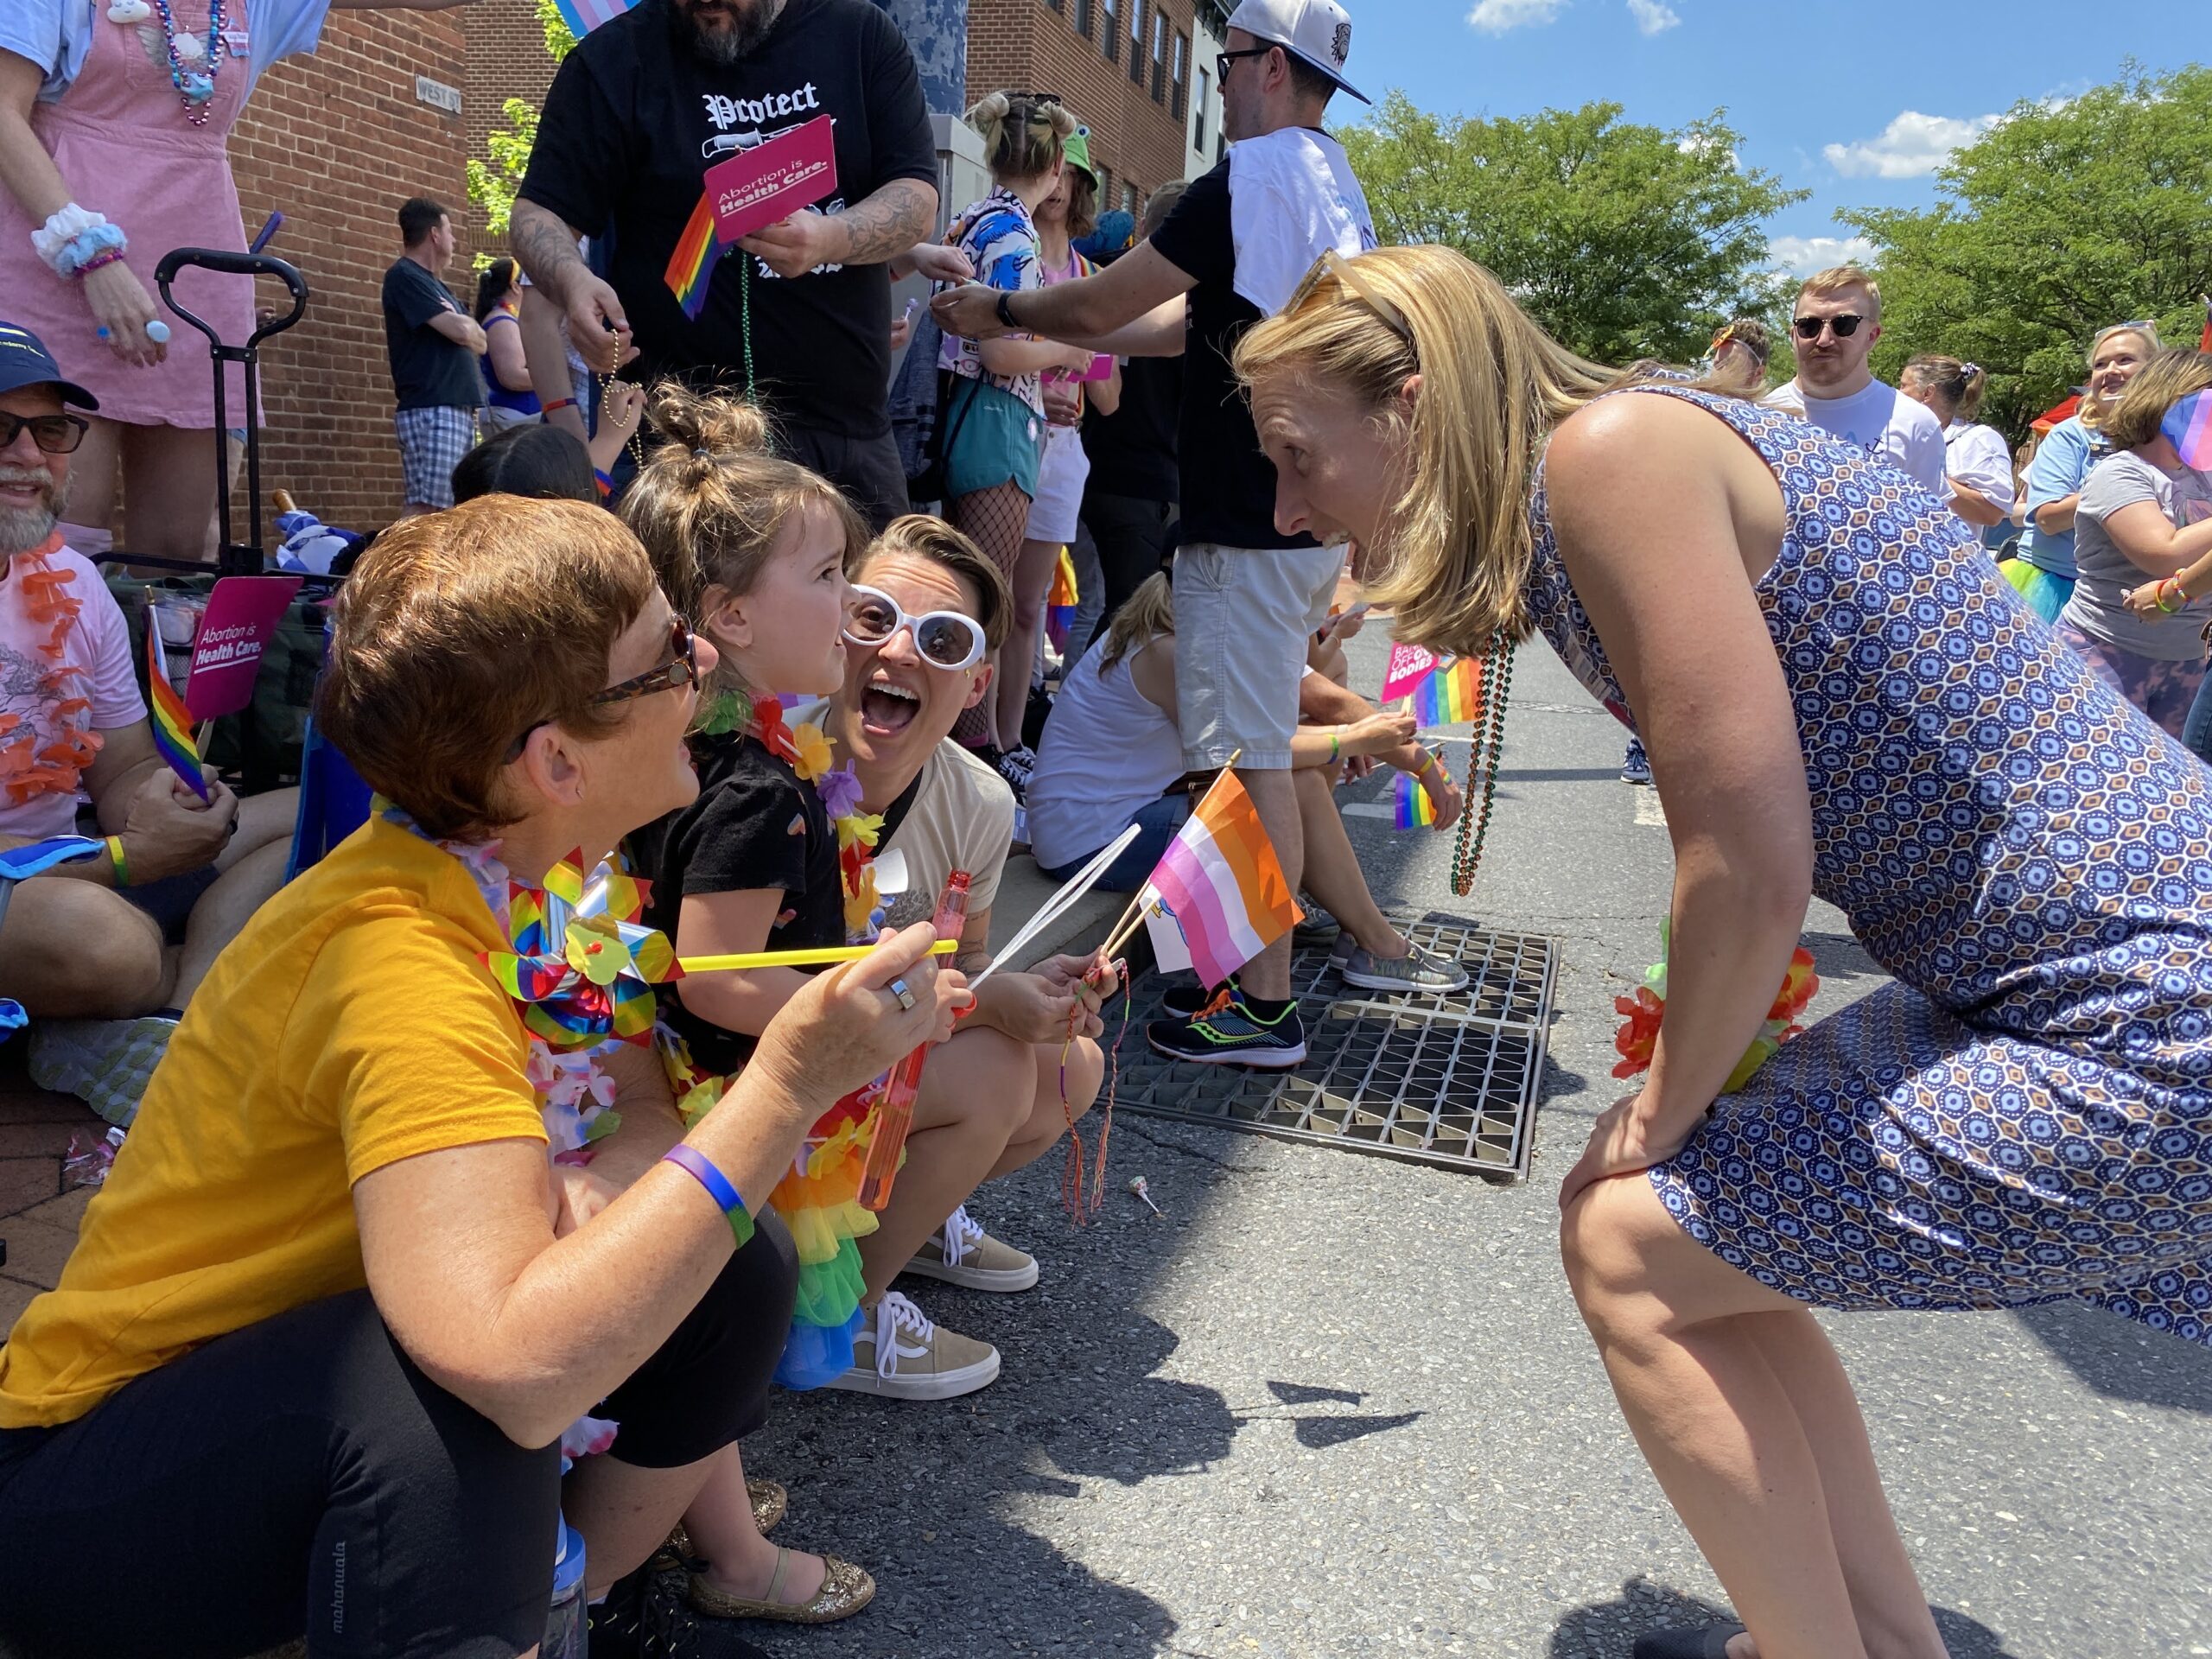 Democratic comptroller candidate Brooke Lierman talks to an enthusiastic young voter. Lierman is the first woman independently elected to statewide office in Maryland. (Courtesy Brooke Lierman for Maryland)